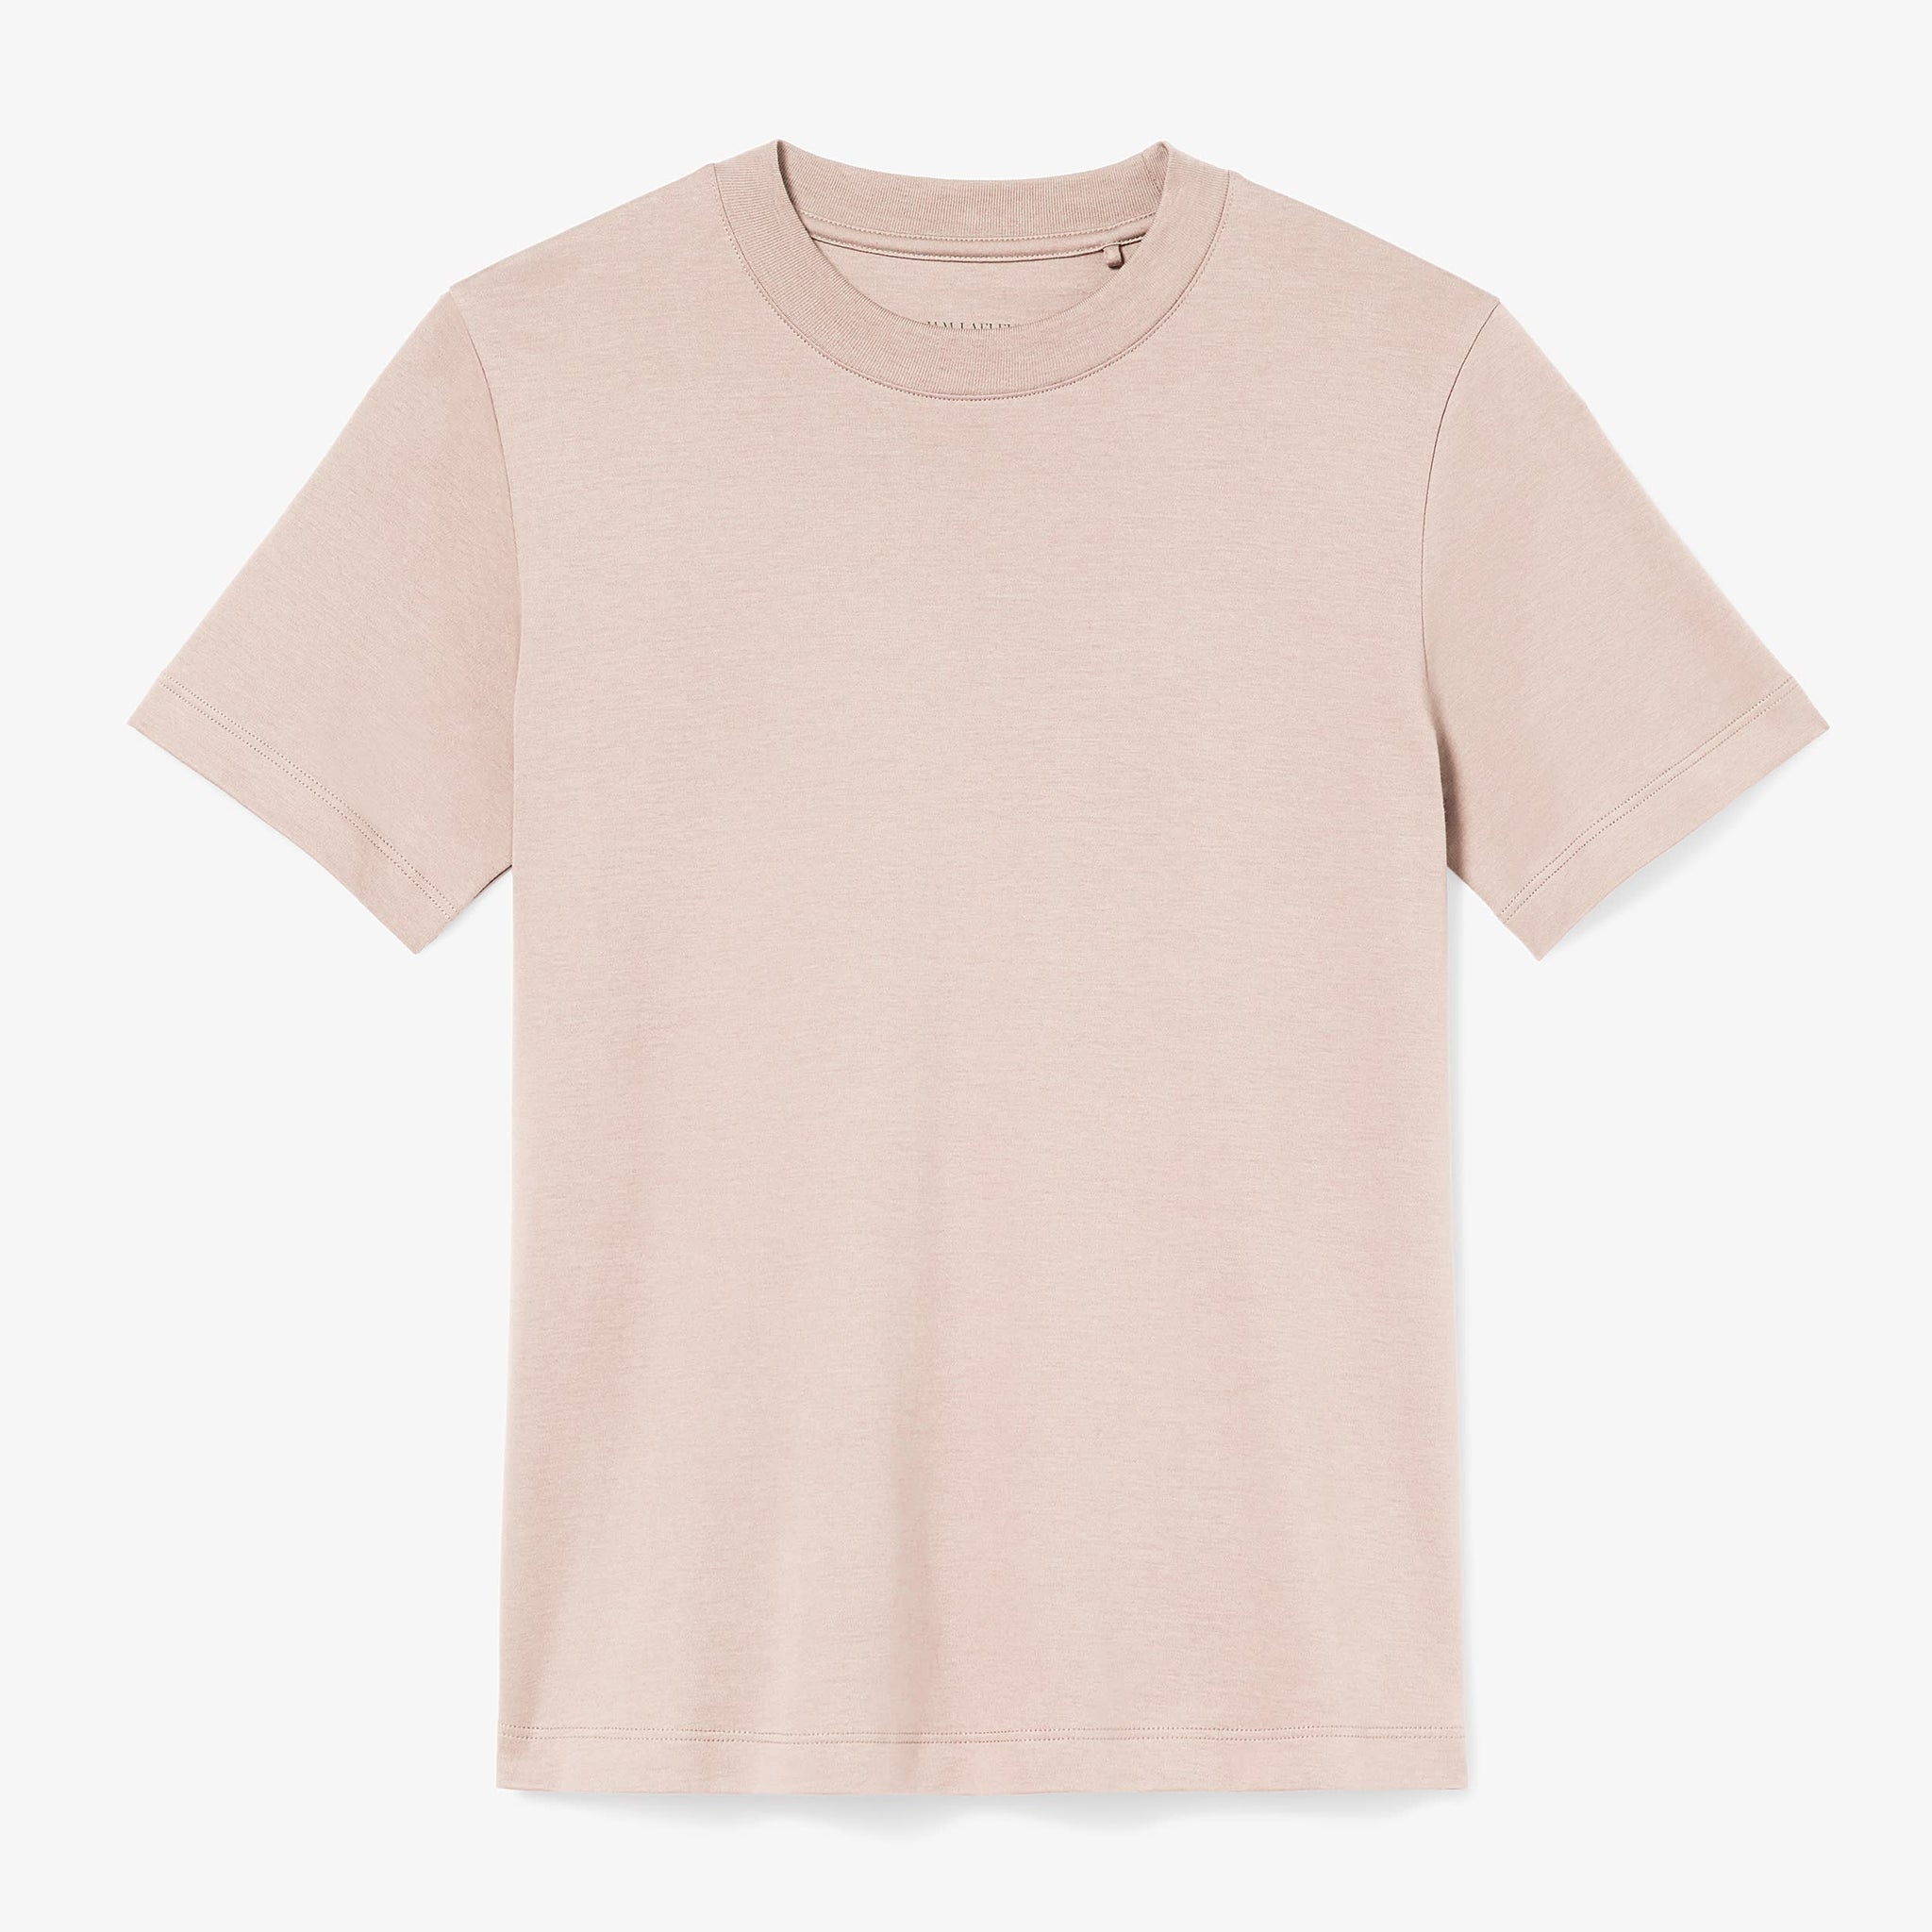 Packshot image of the Leslie T-Shirt—Compact Cotton in Dusty Pink